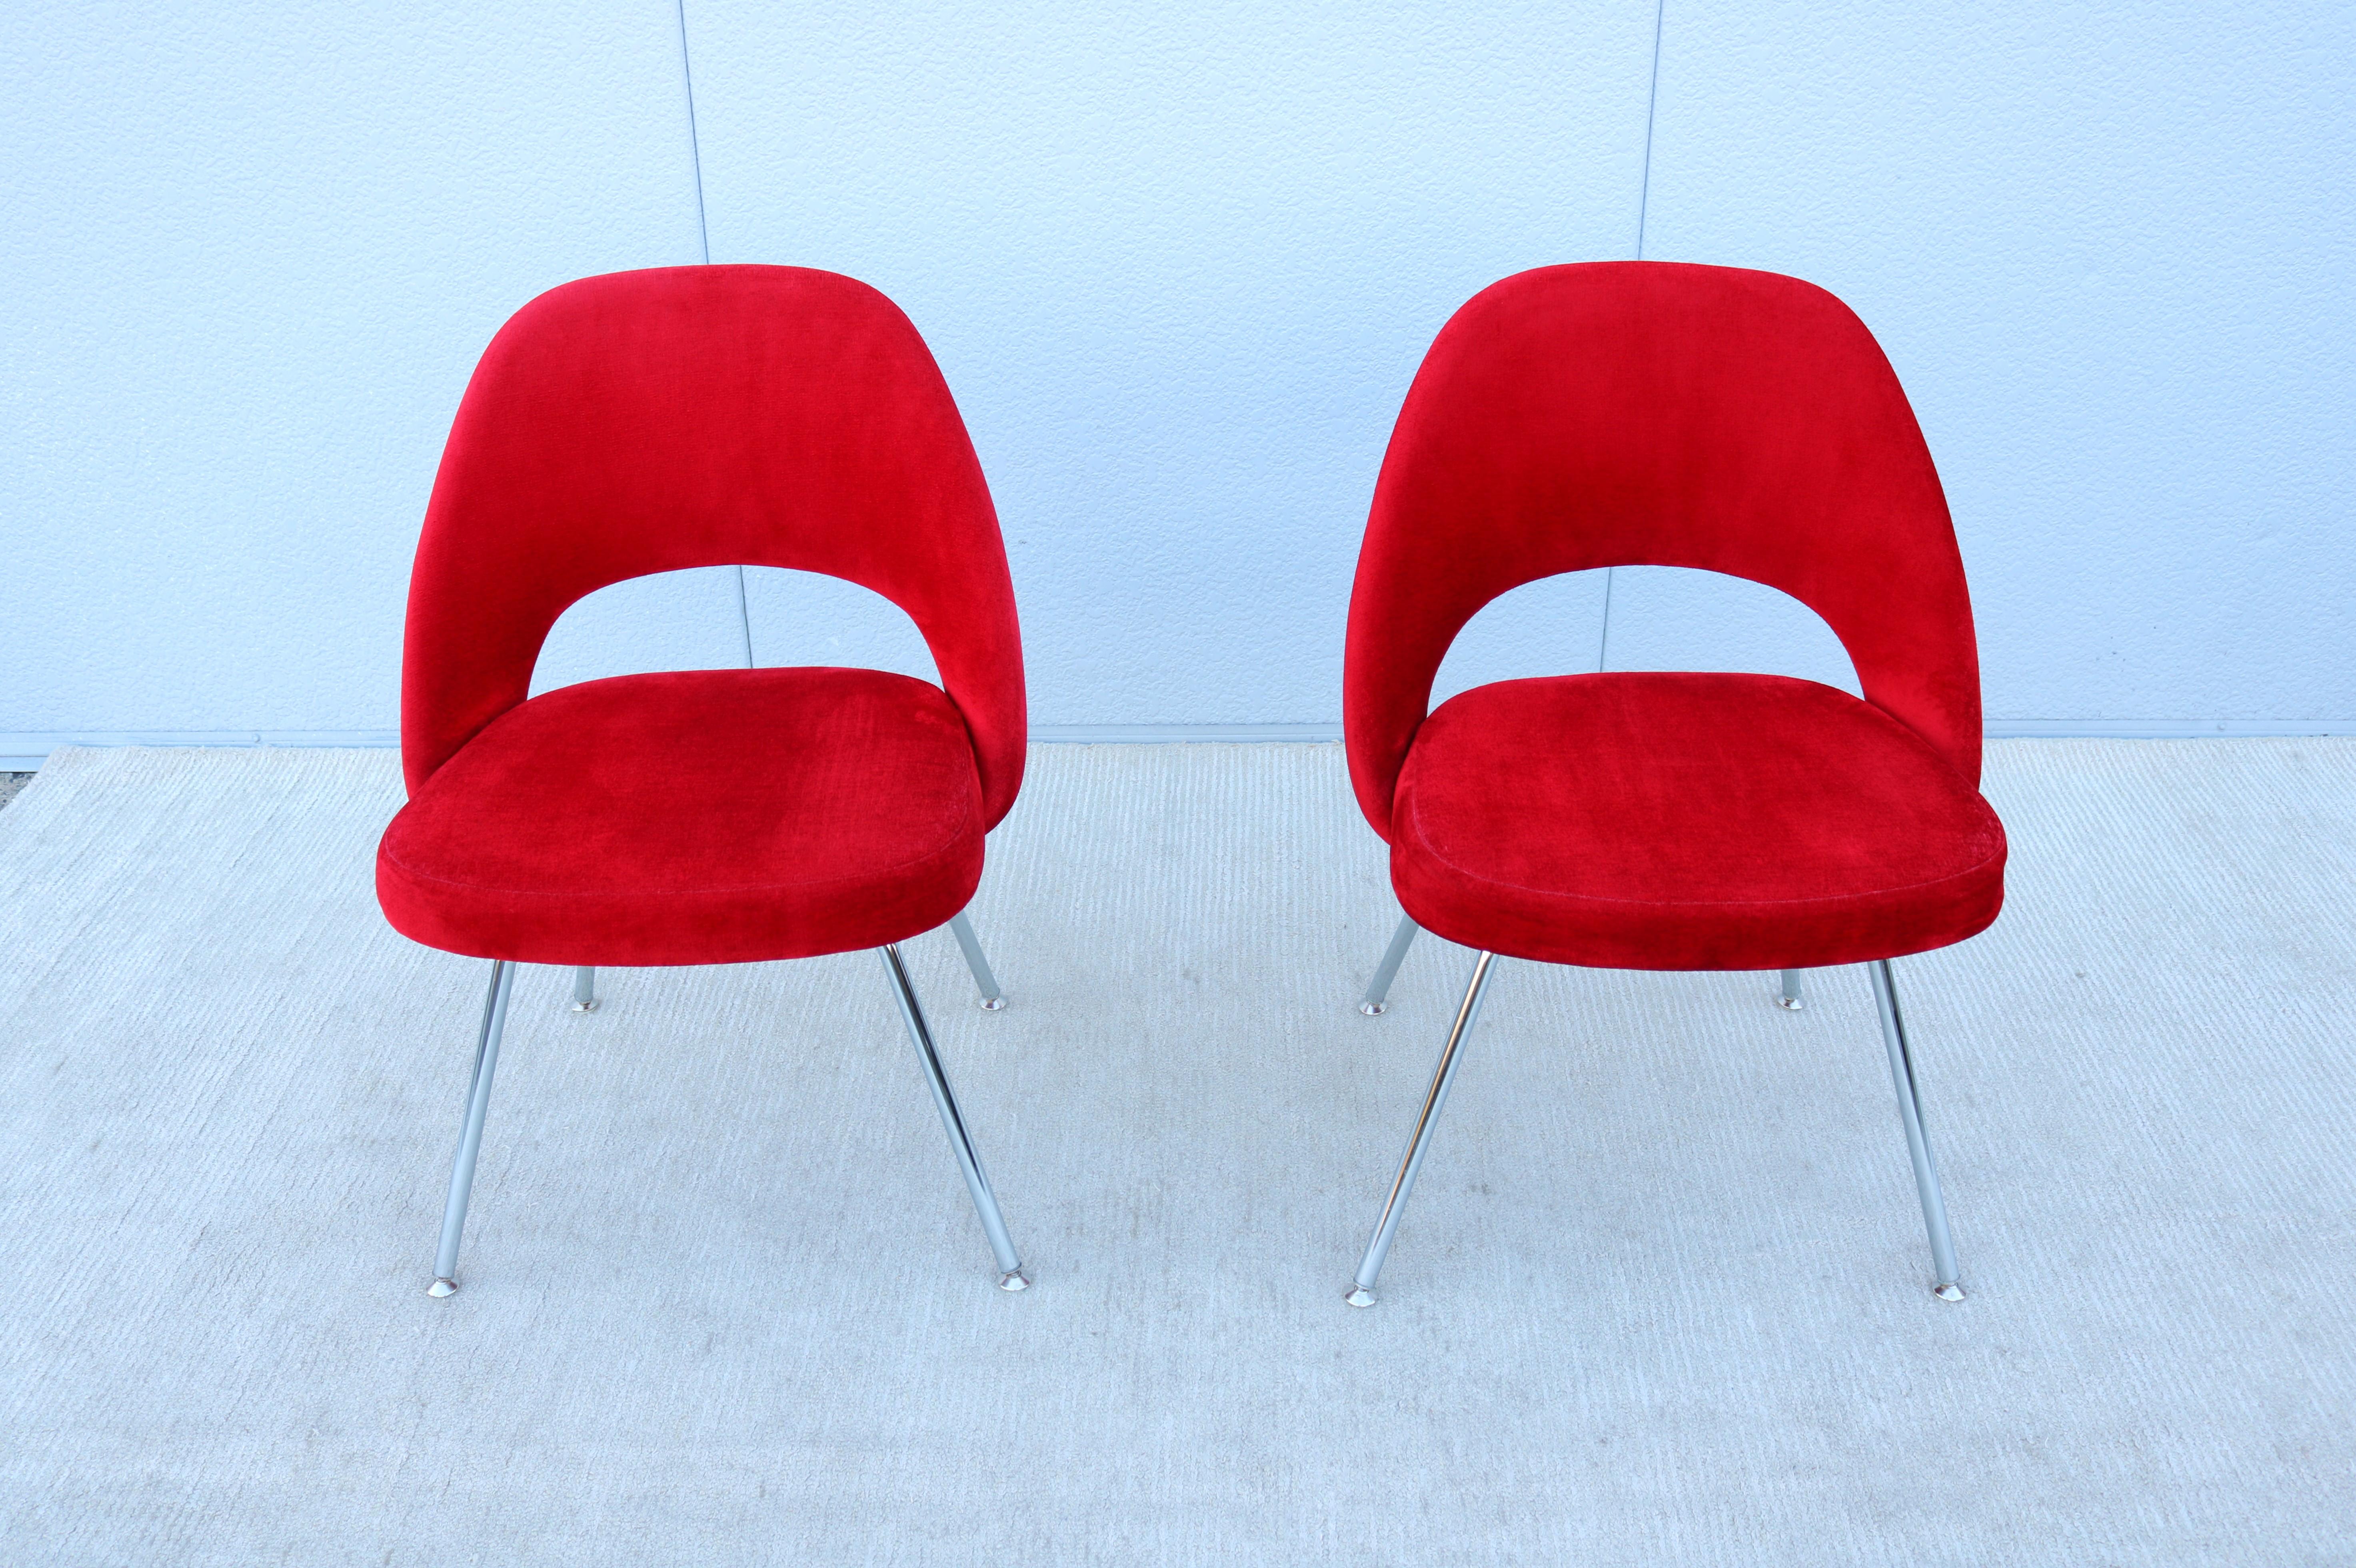 American Mid-Century Modern Eero Saarinen for Knoll Red Executive Armless Chairs - a Pair For Sale